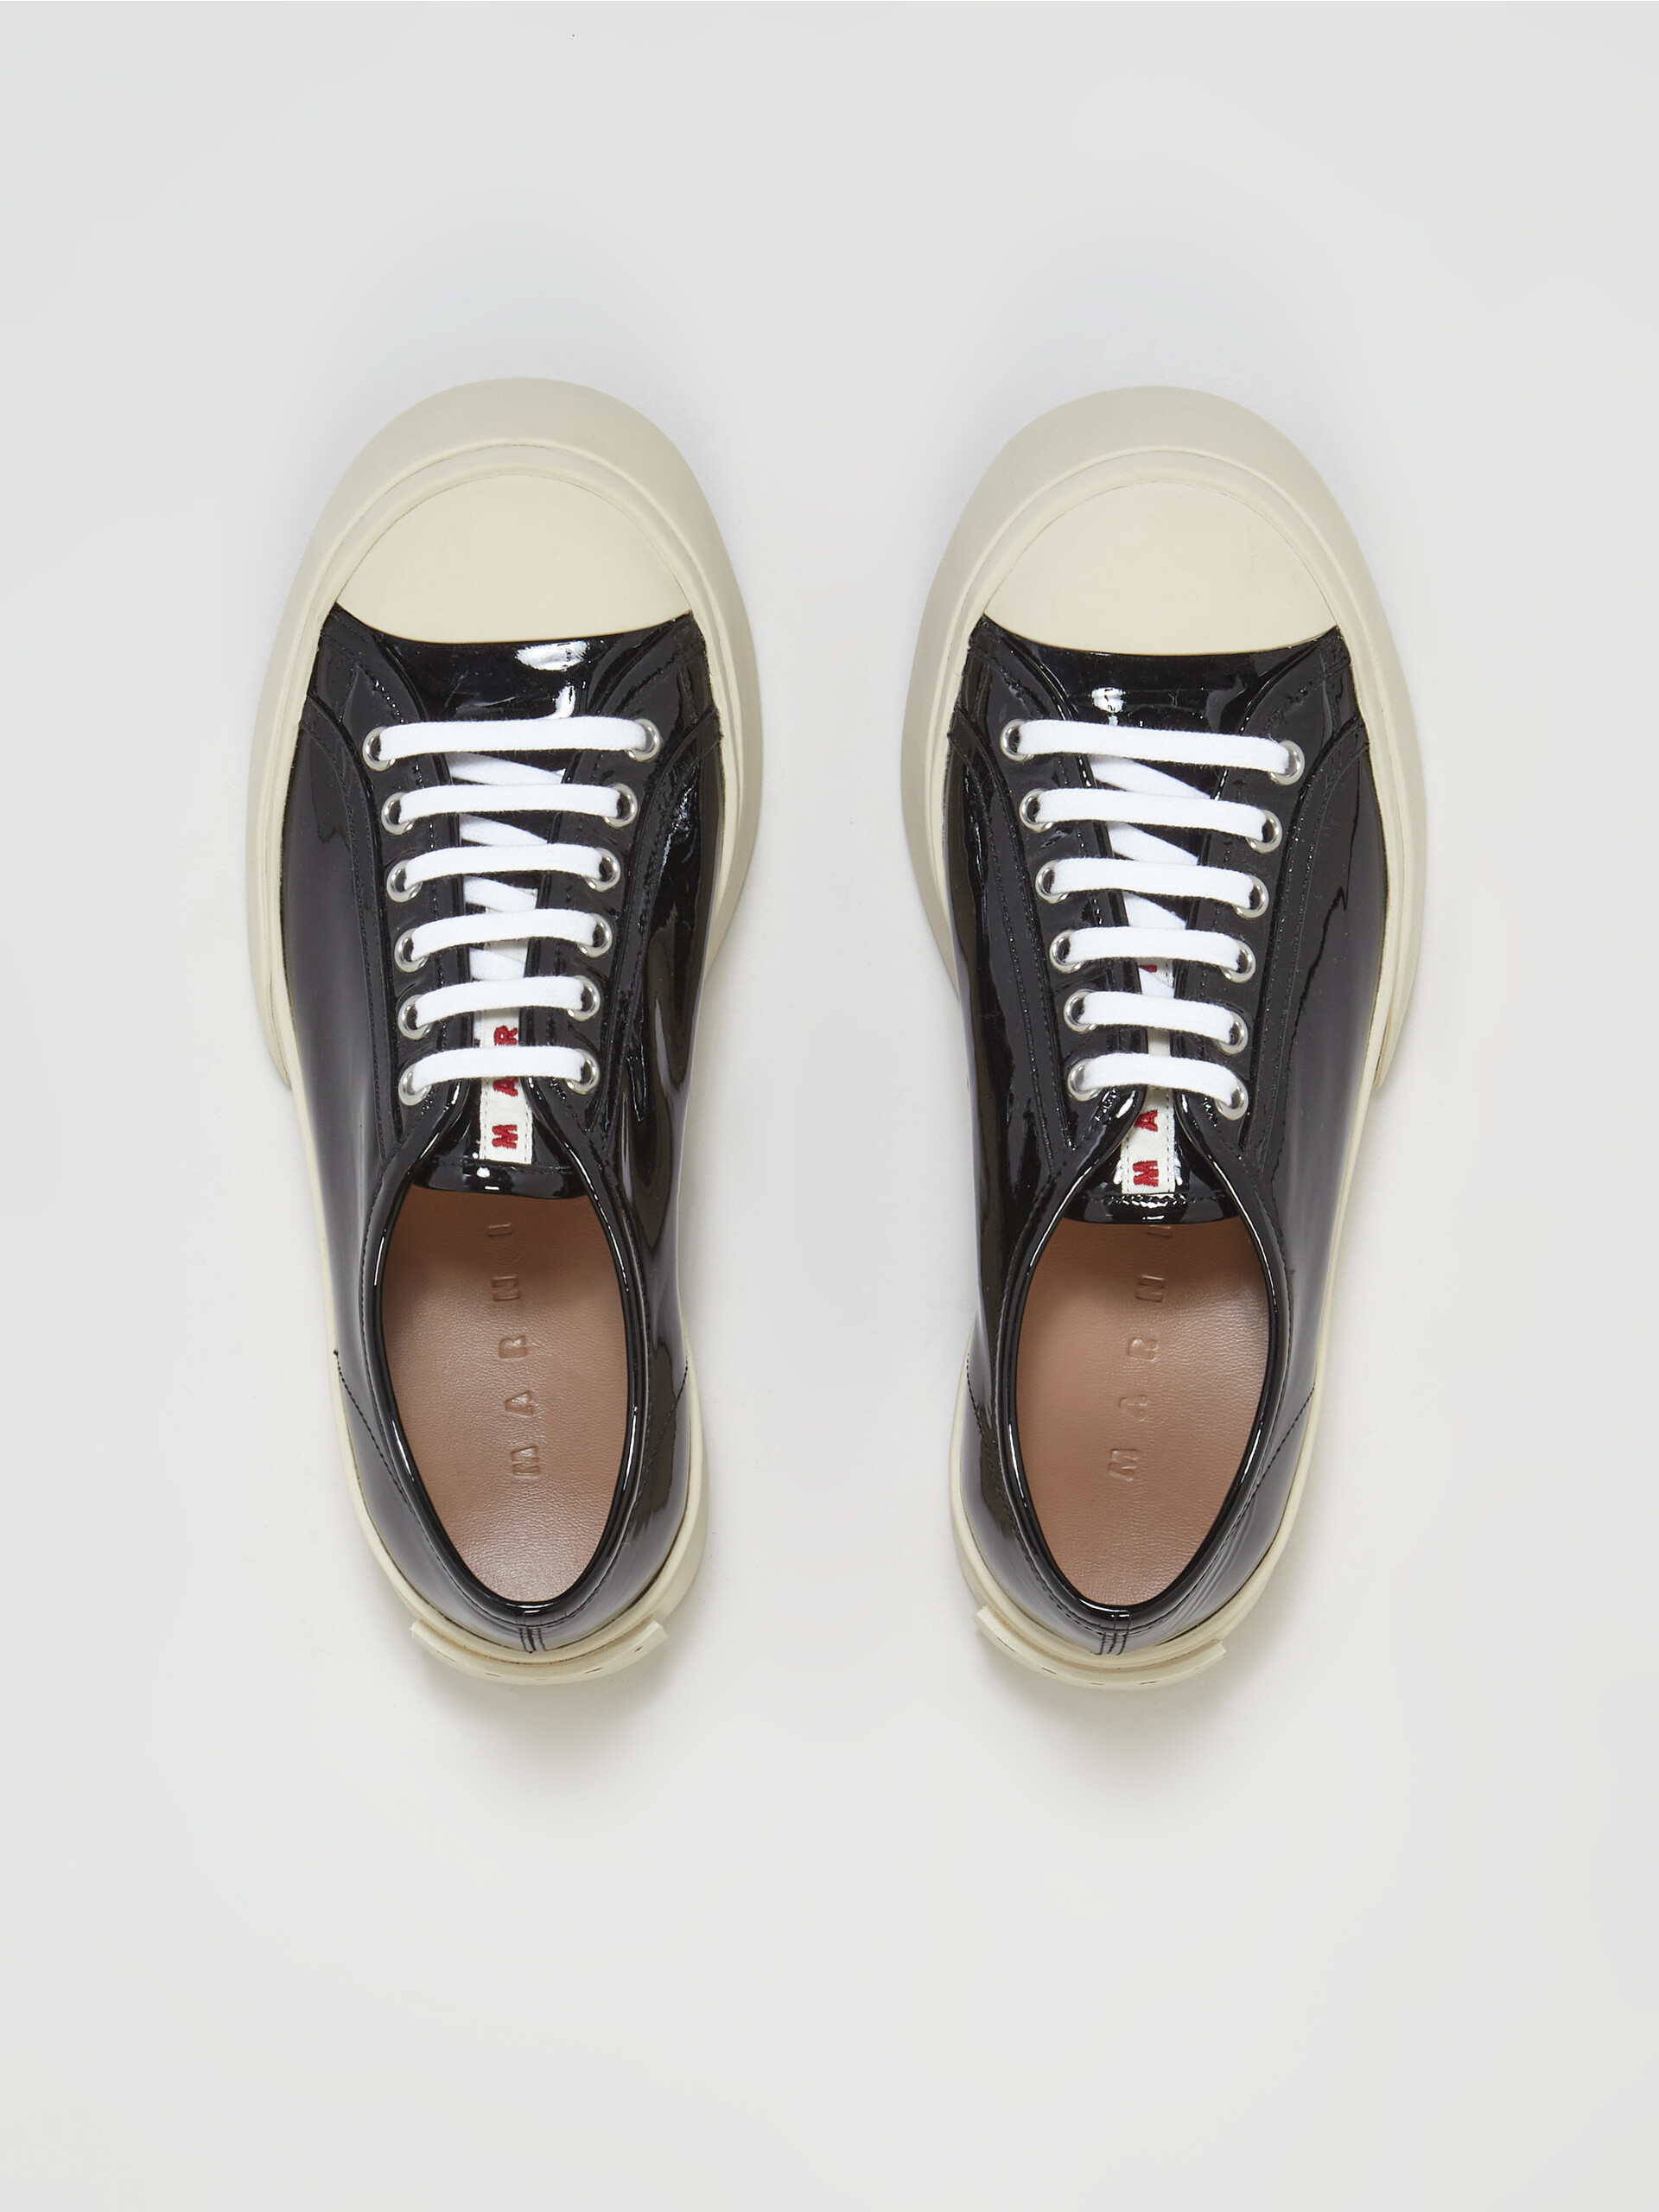 Black patent leather PABLO lace-up sneaker - Sneakers - Image 4